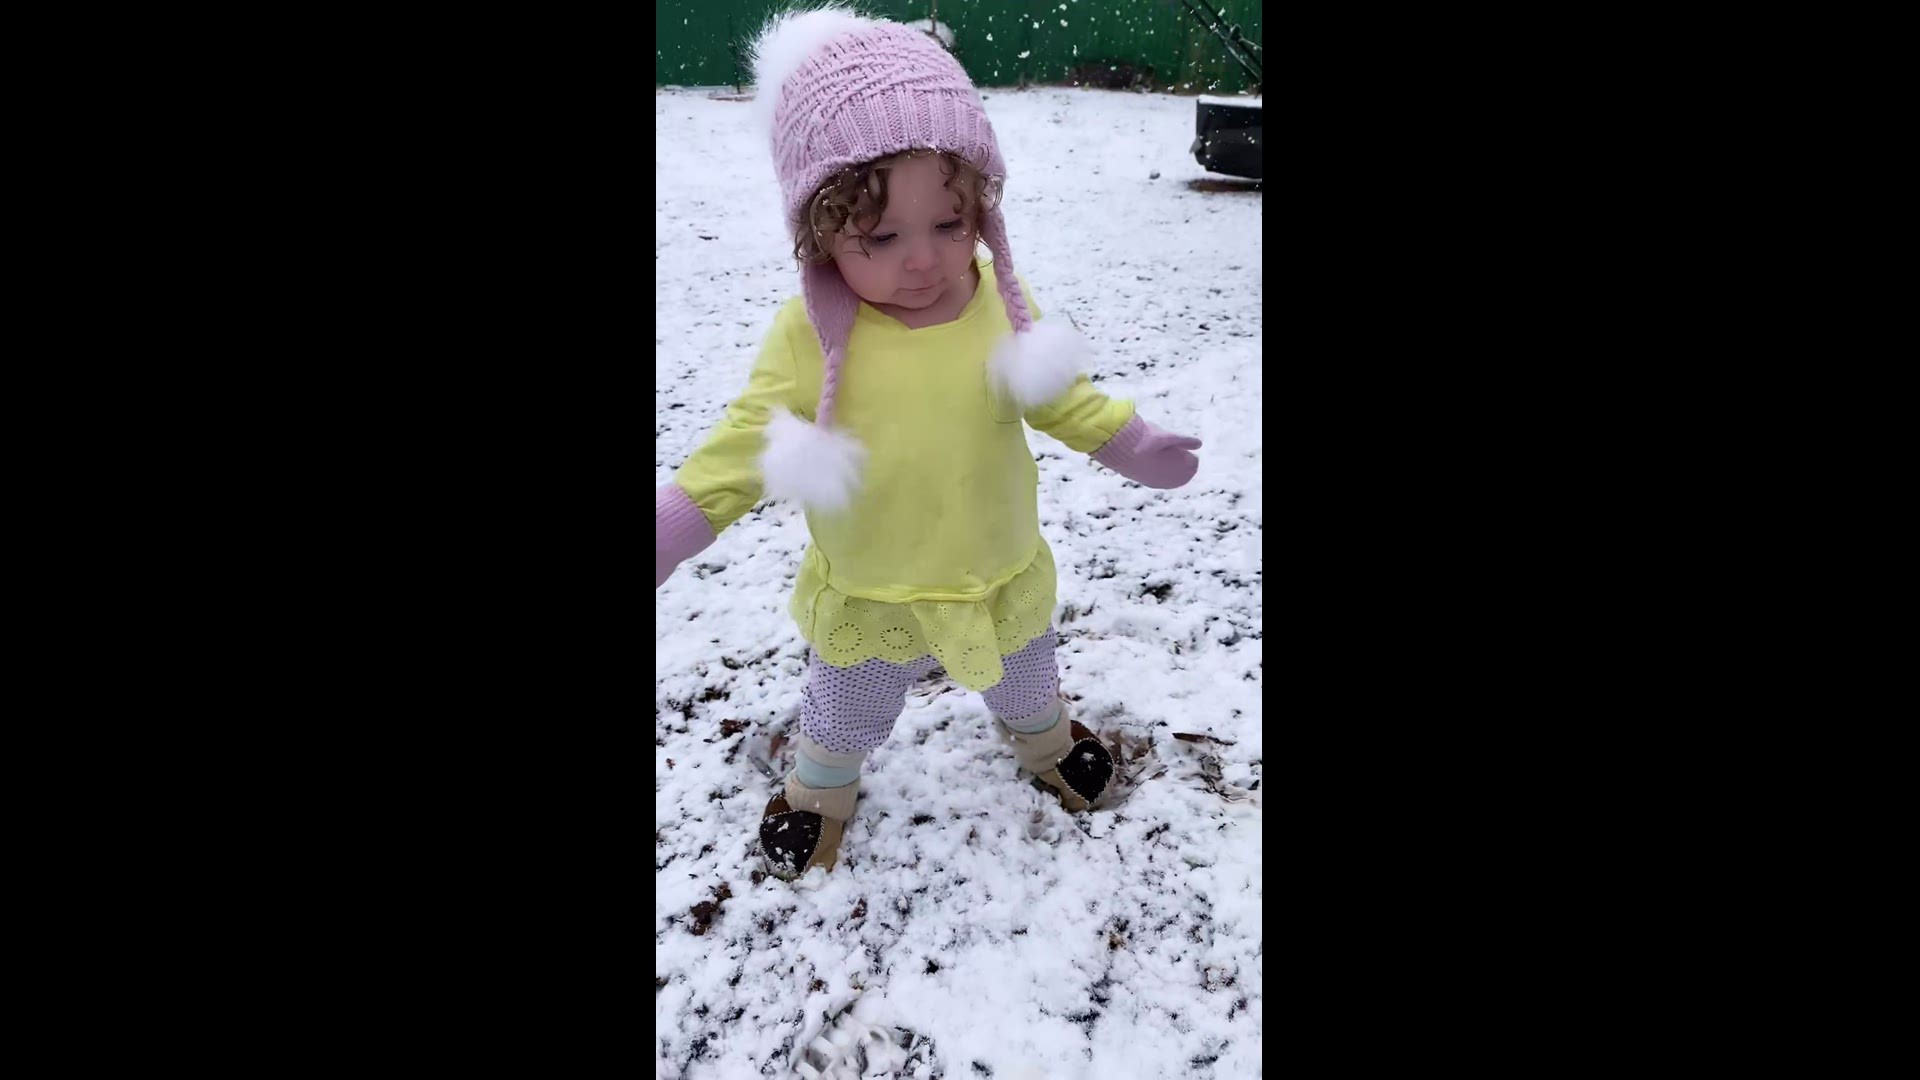 Kerrigan Munro's first time in the snow